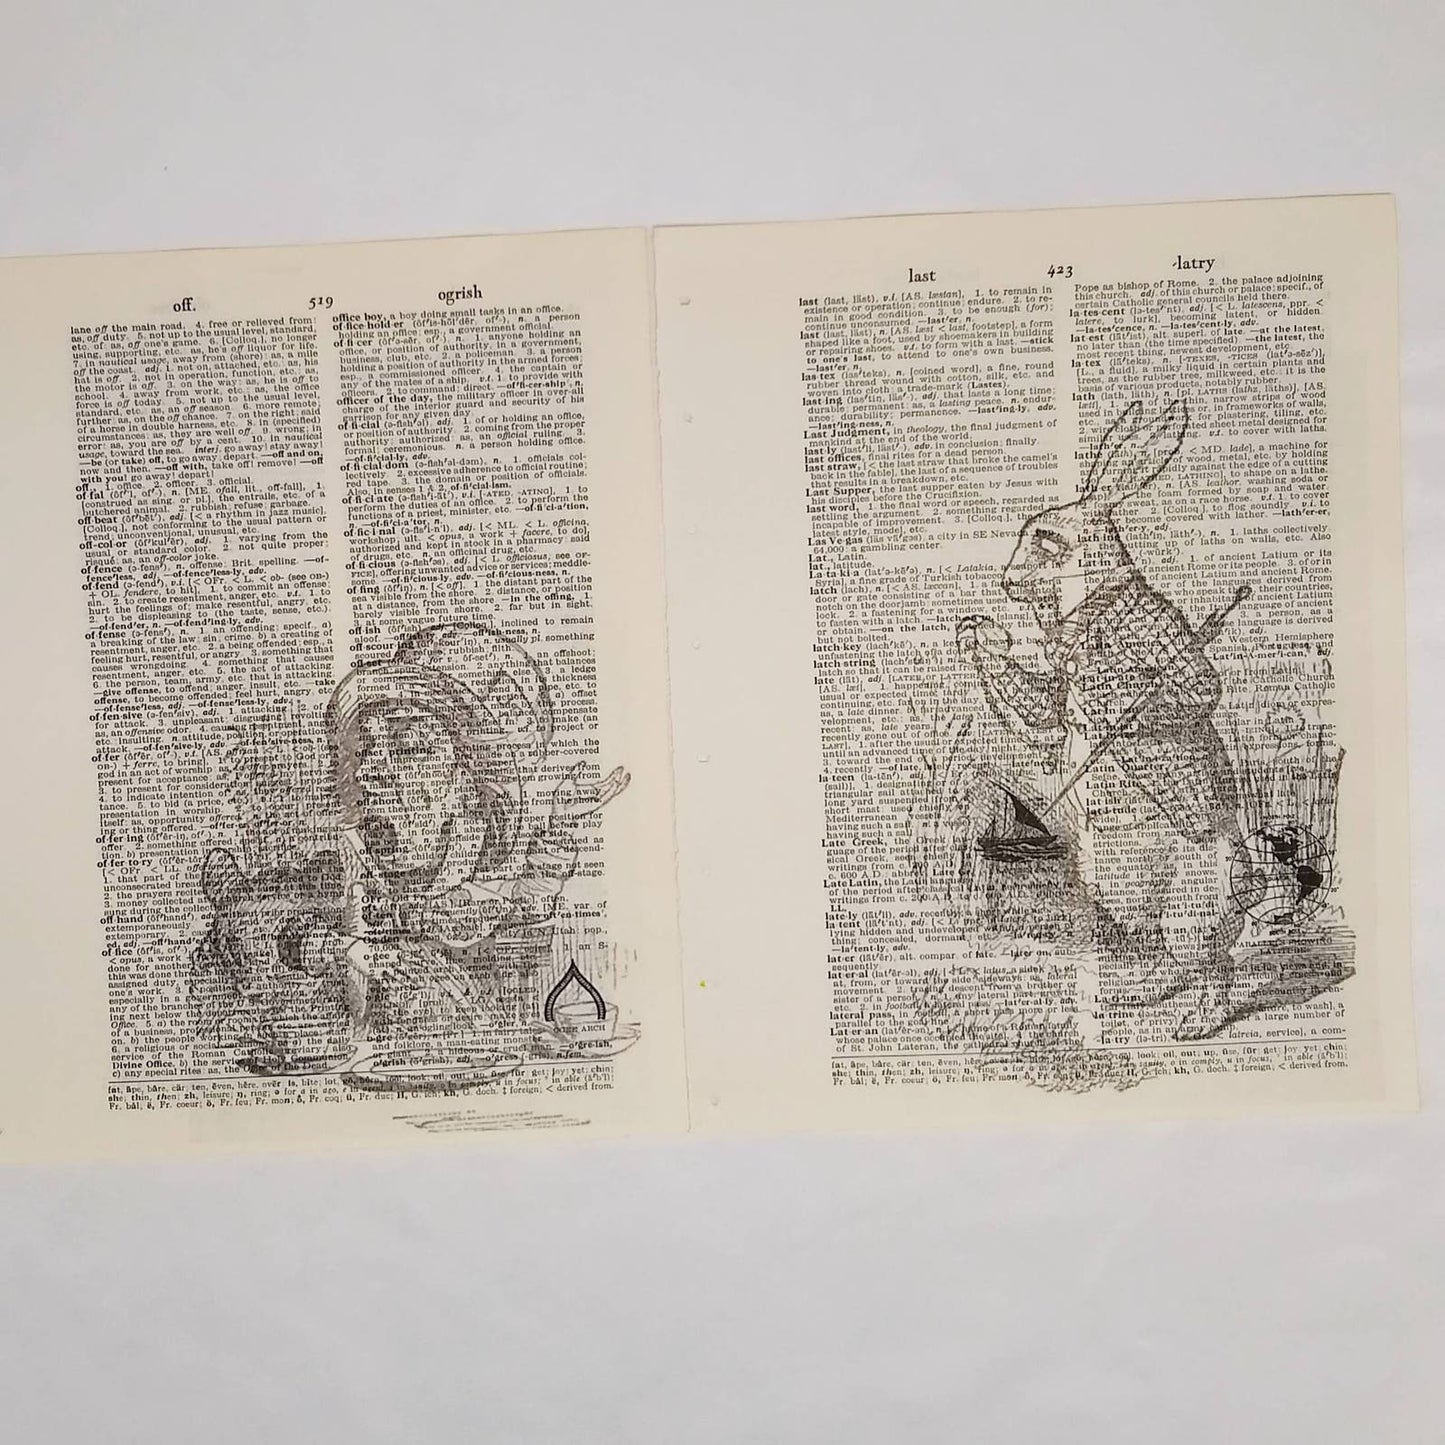 Alice in Wonderland Vintage Dictionary Prints, Through the Looking Glass Prints